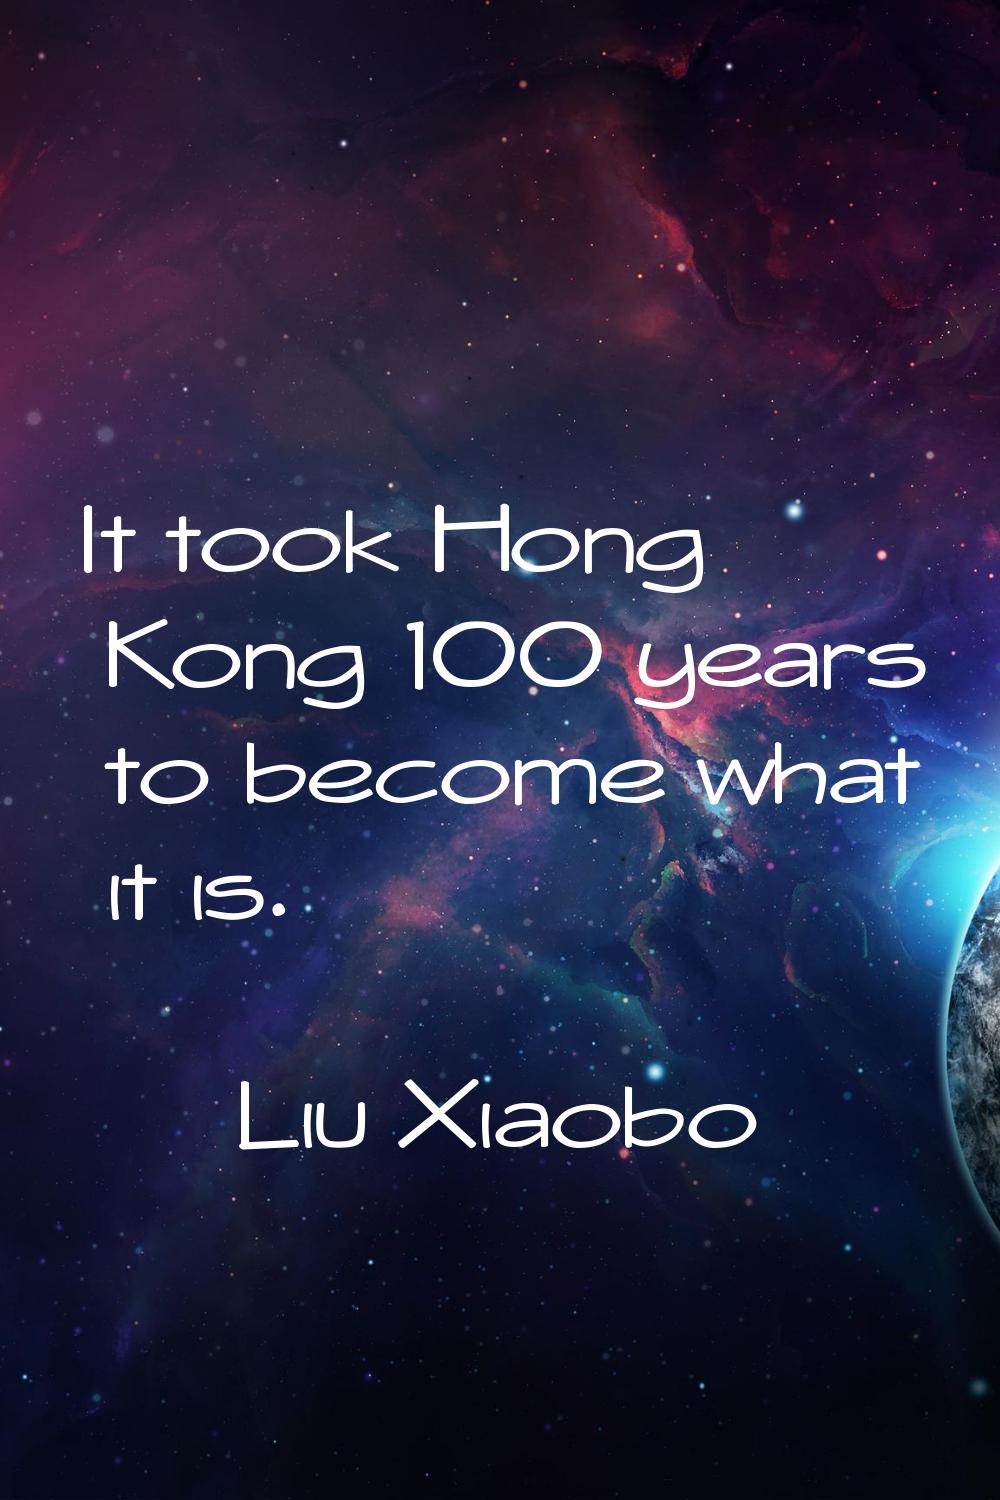 It took Hong Kong 100 years to become what it is.